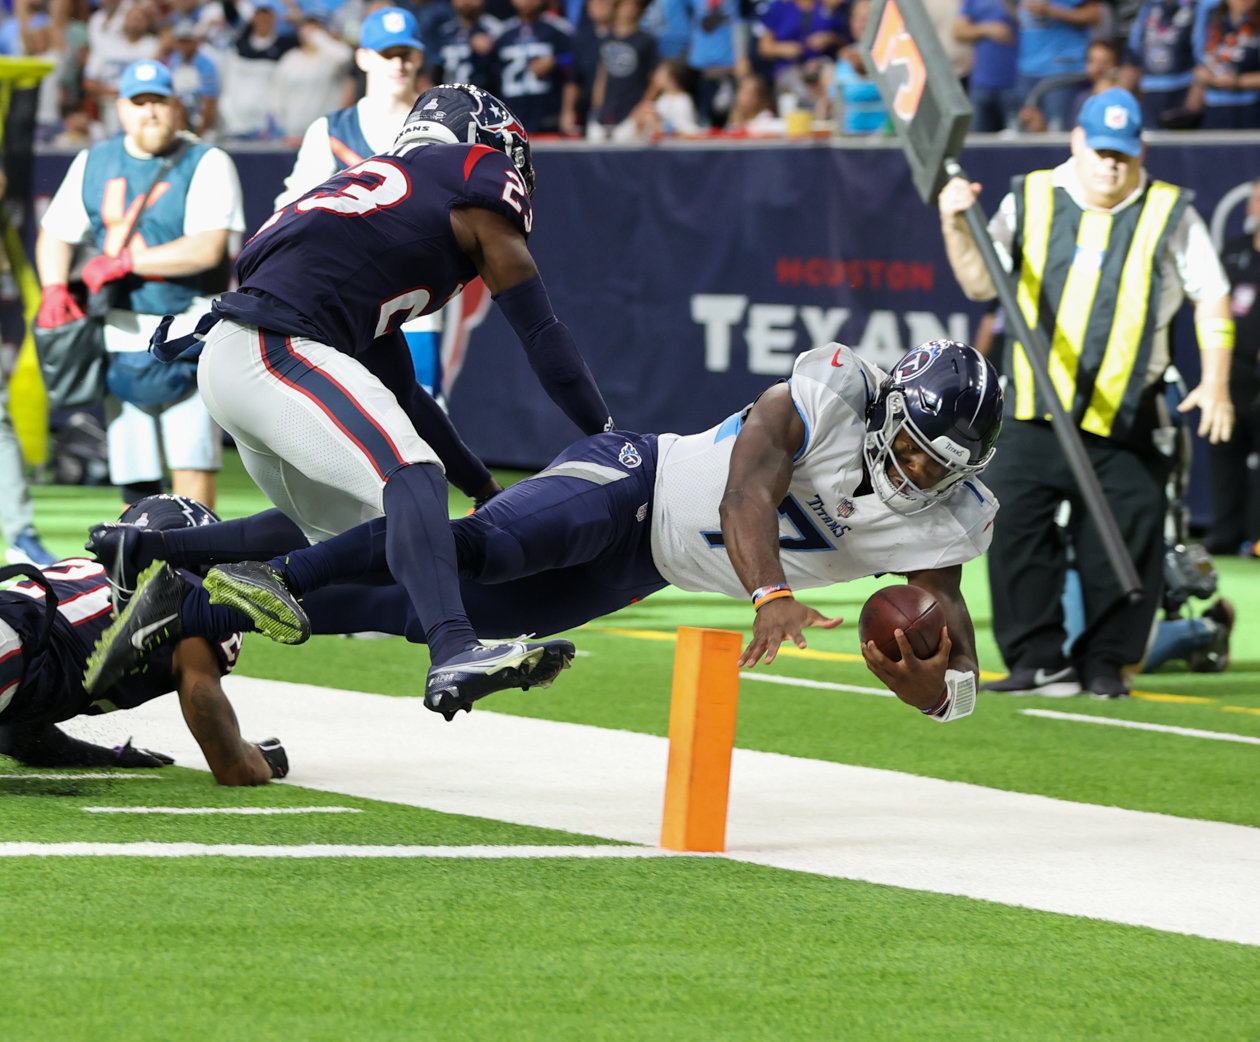 Titans quarterback Malik Willis (7) dives for the end zone but is ruled down at the 1-yard line during an NFL game between the Texans and the Titans on Oct. 30, 2022 in Houston.